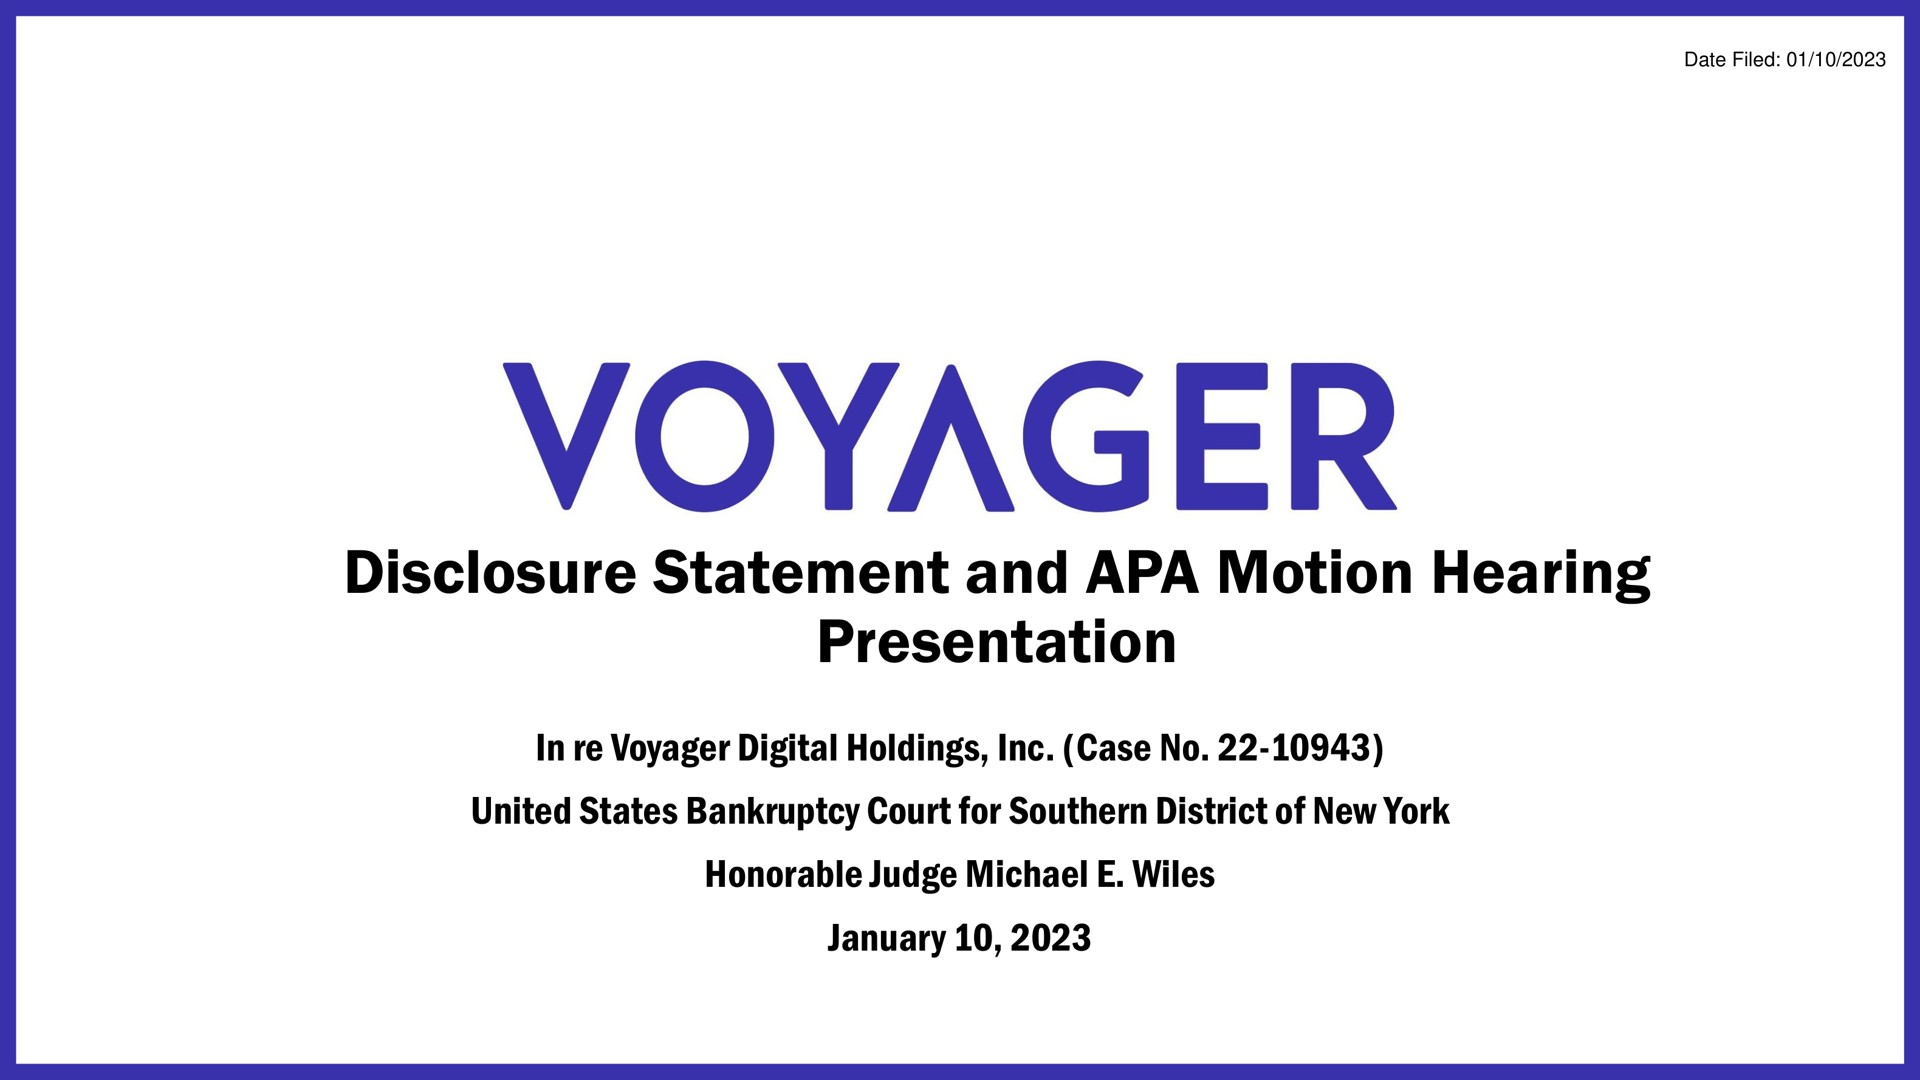 disclosure statement and apa motion hearing presentation in voyager digital holdings case no united states bankruptcy court for southern district of new york honorable judge wiles | Voyager Digital